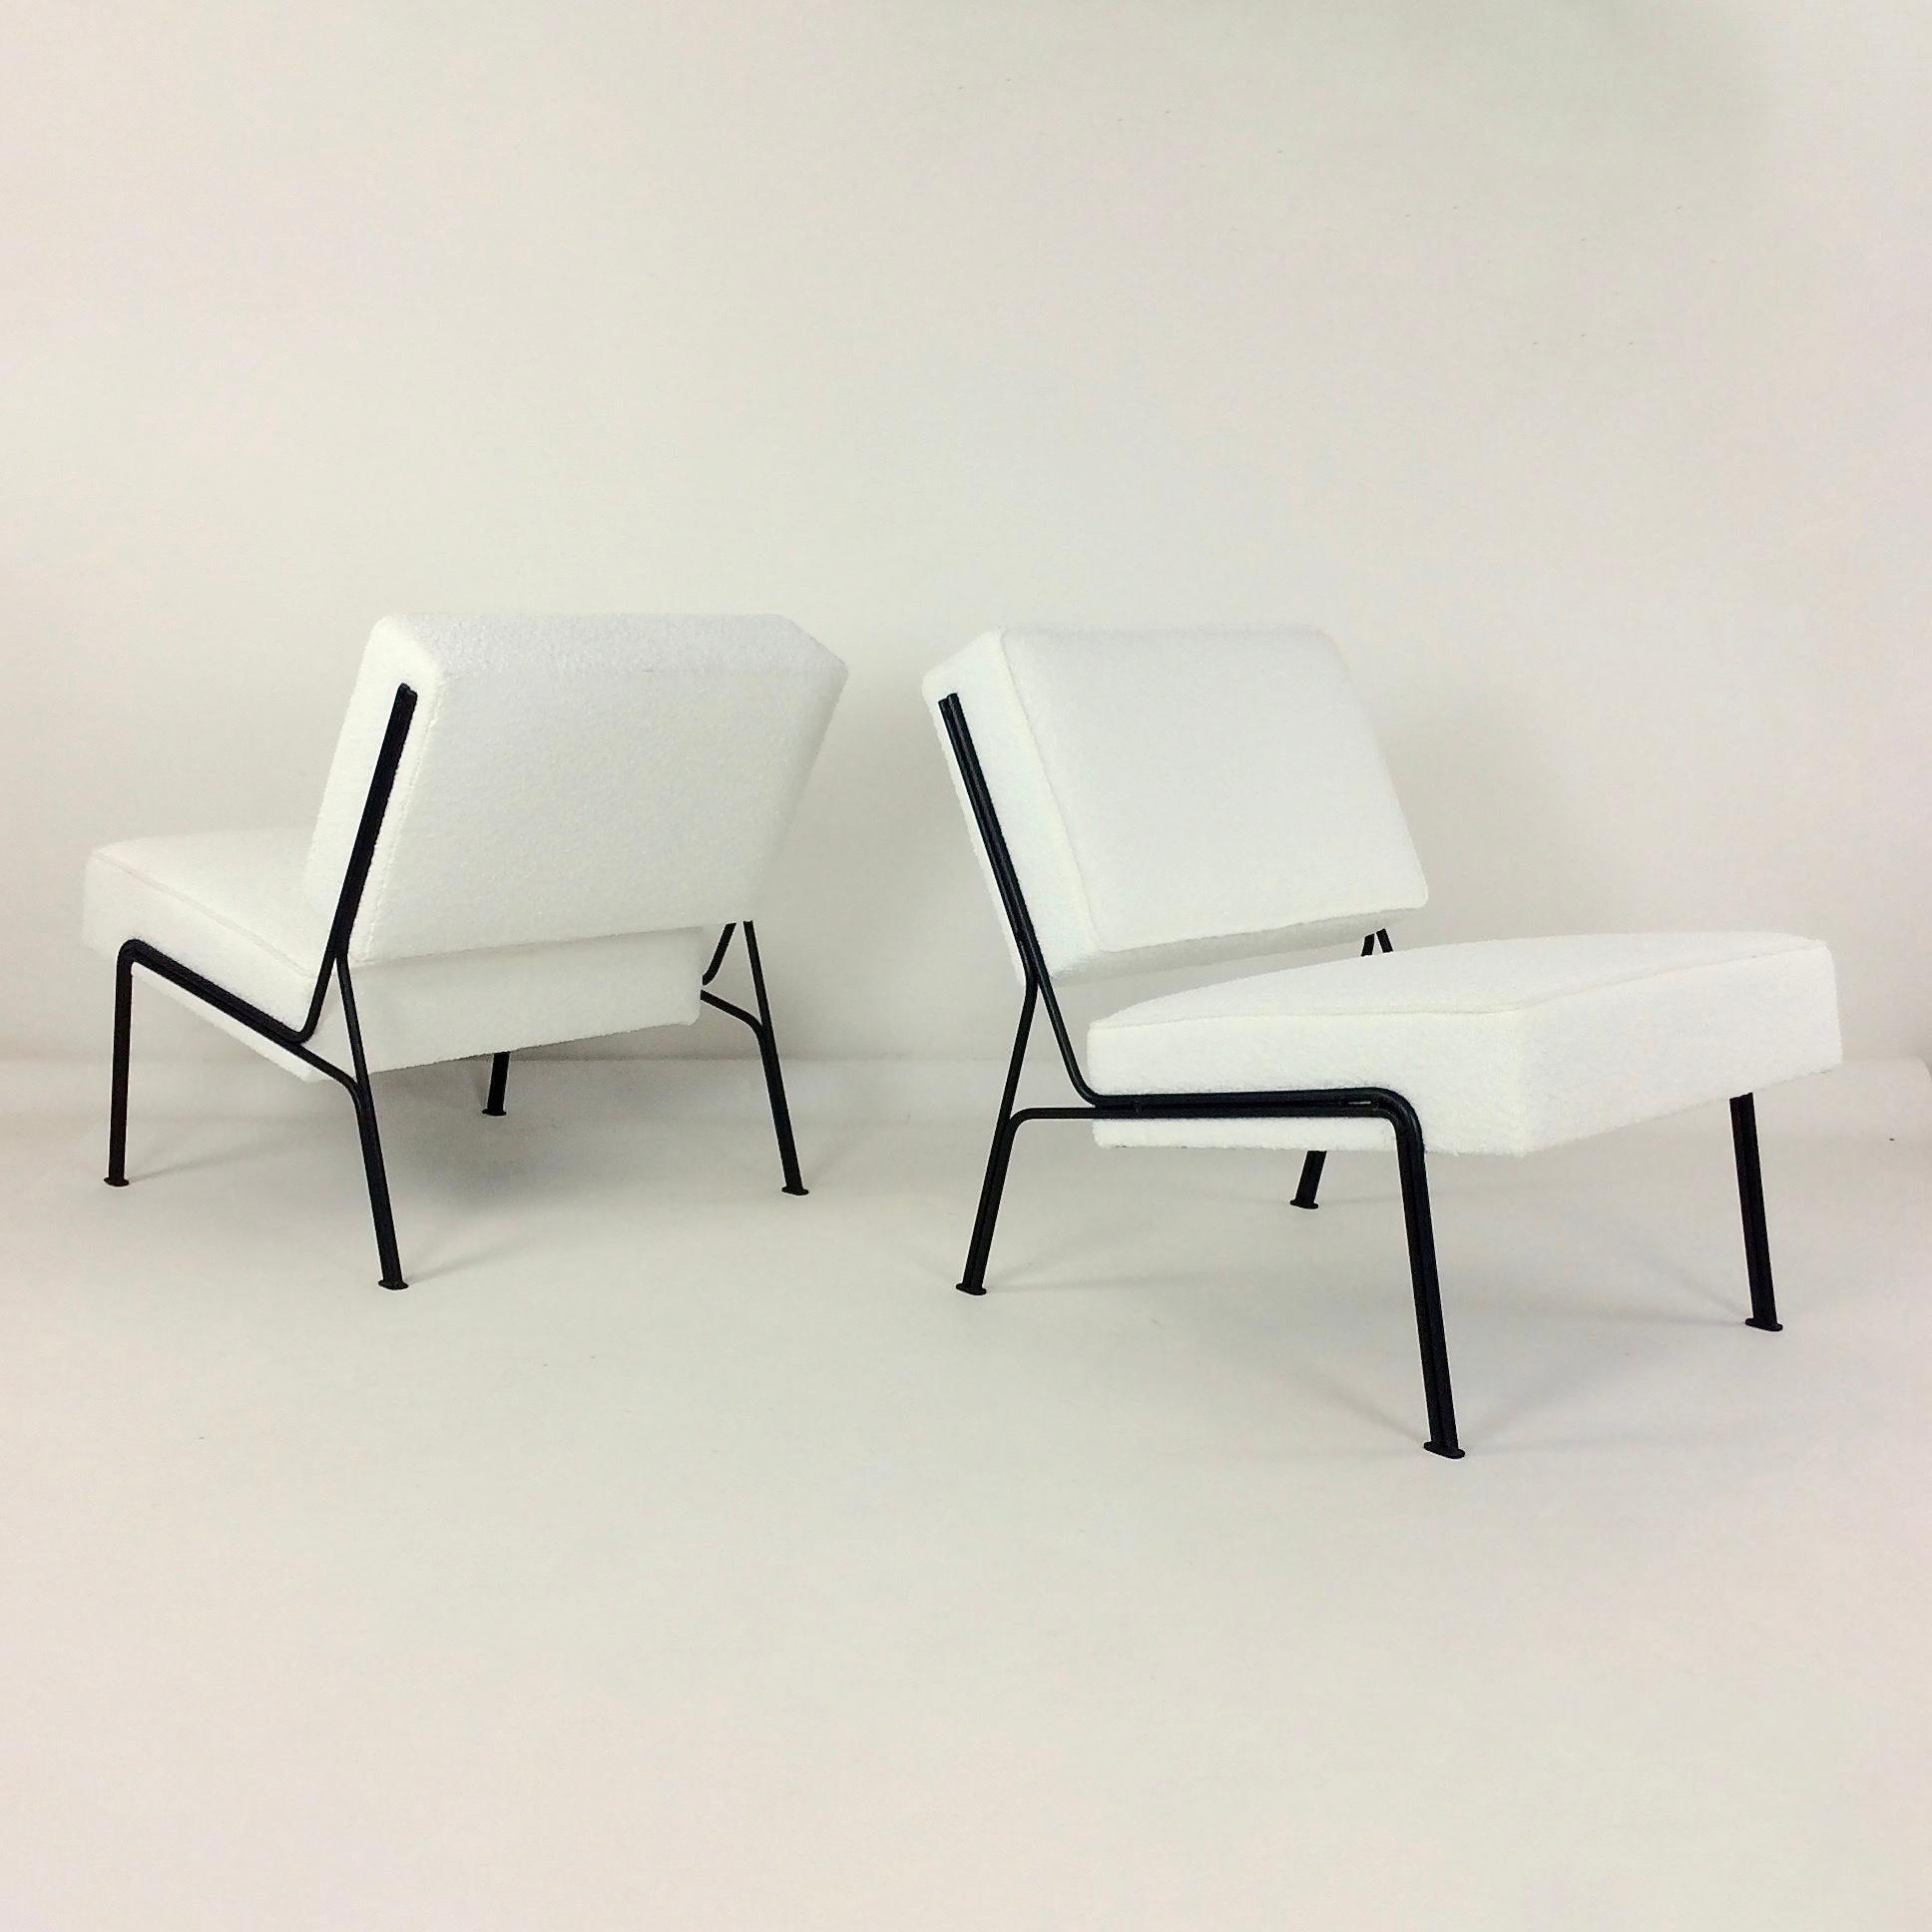 Pair of G2 Chairs By A.R.P. Guariche, Motte, Mortier for Airborne, 1953, France. For Sale 2